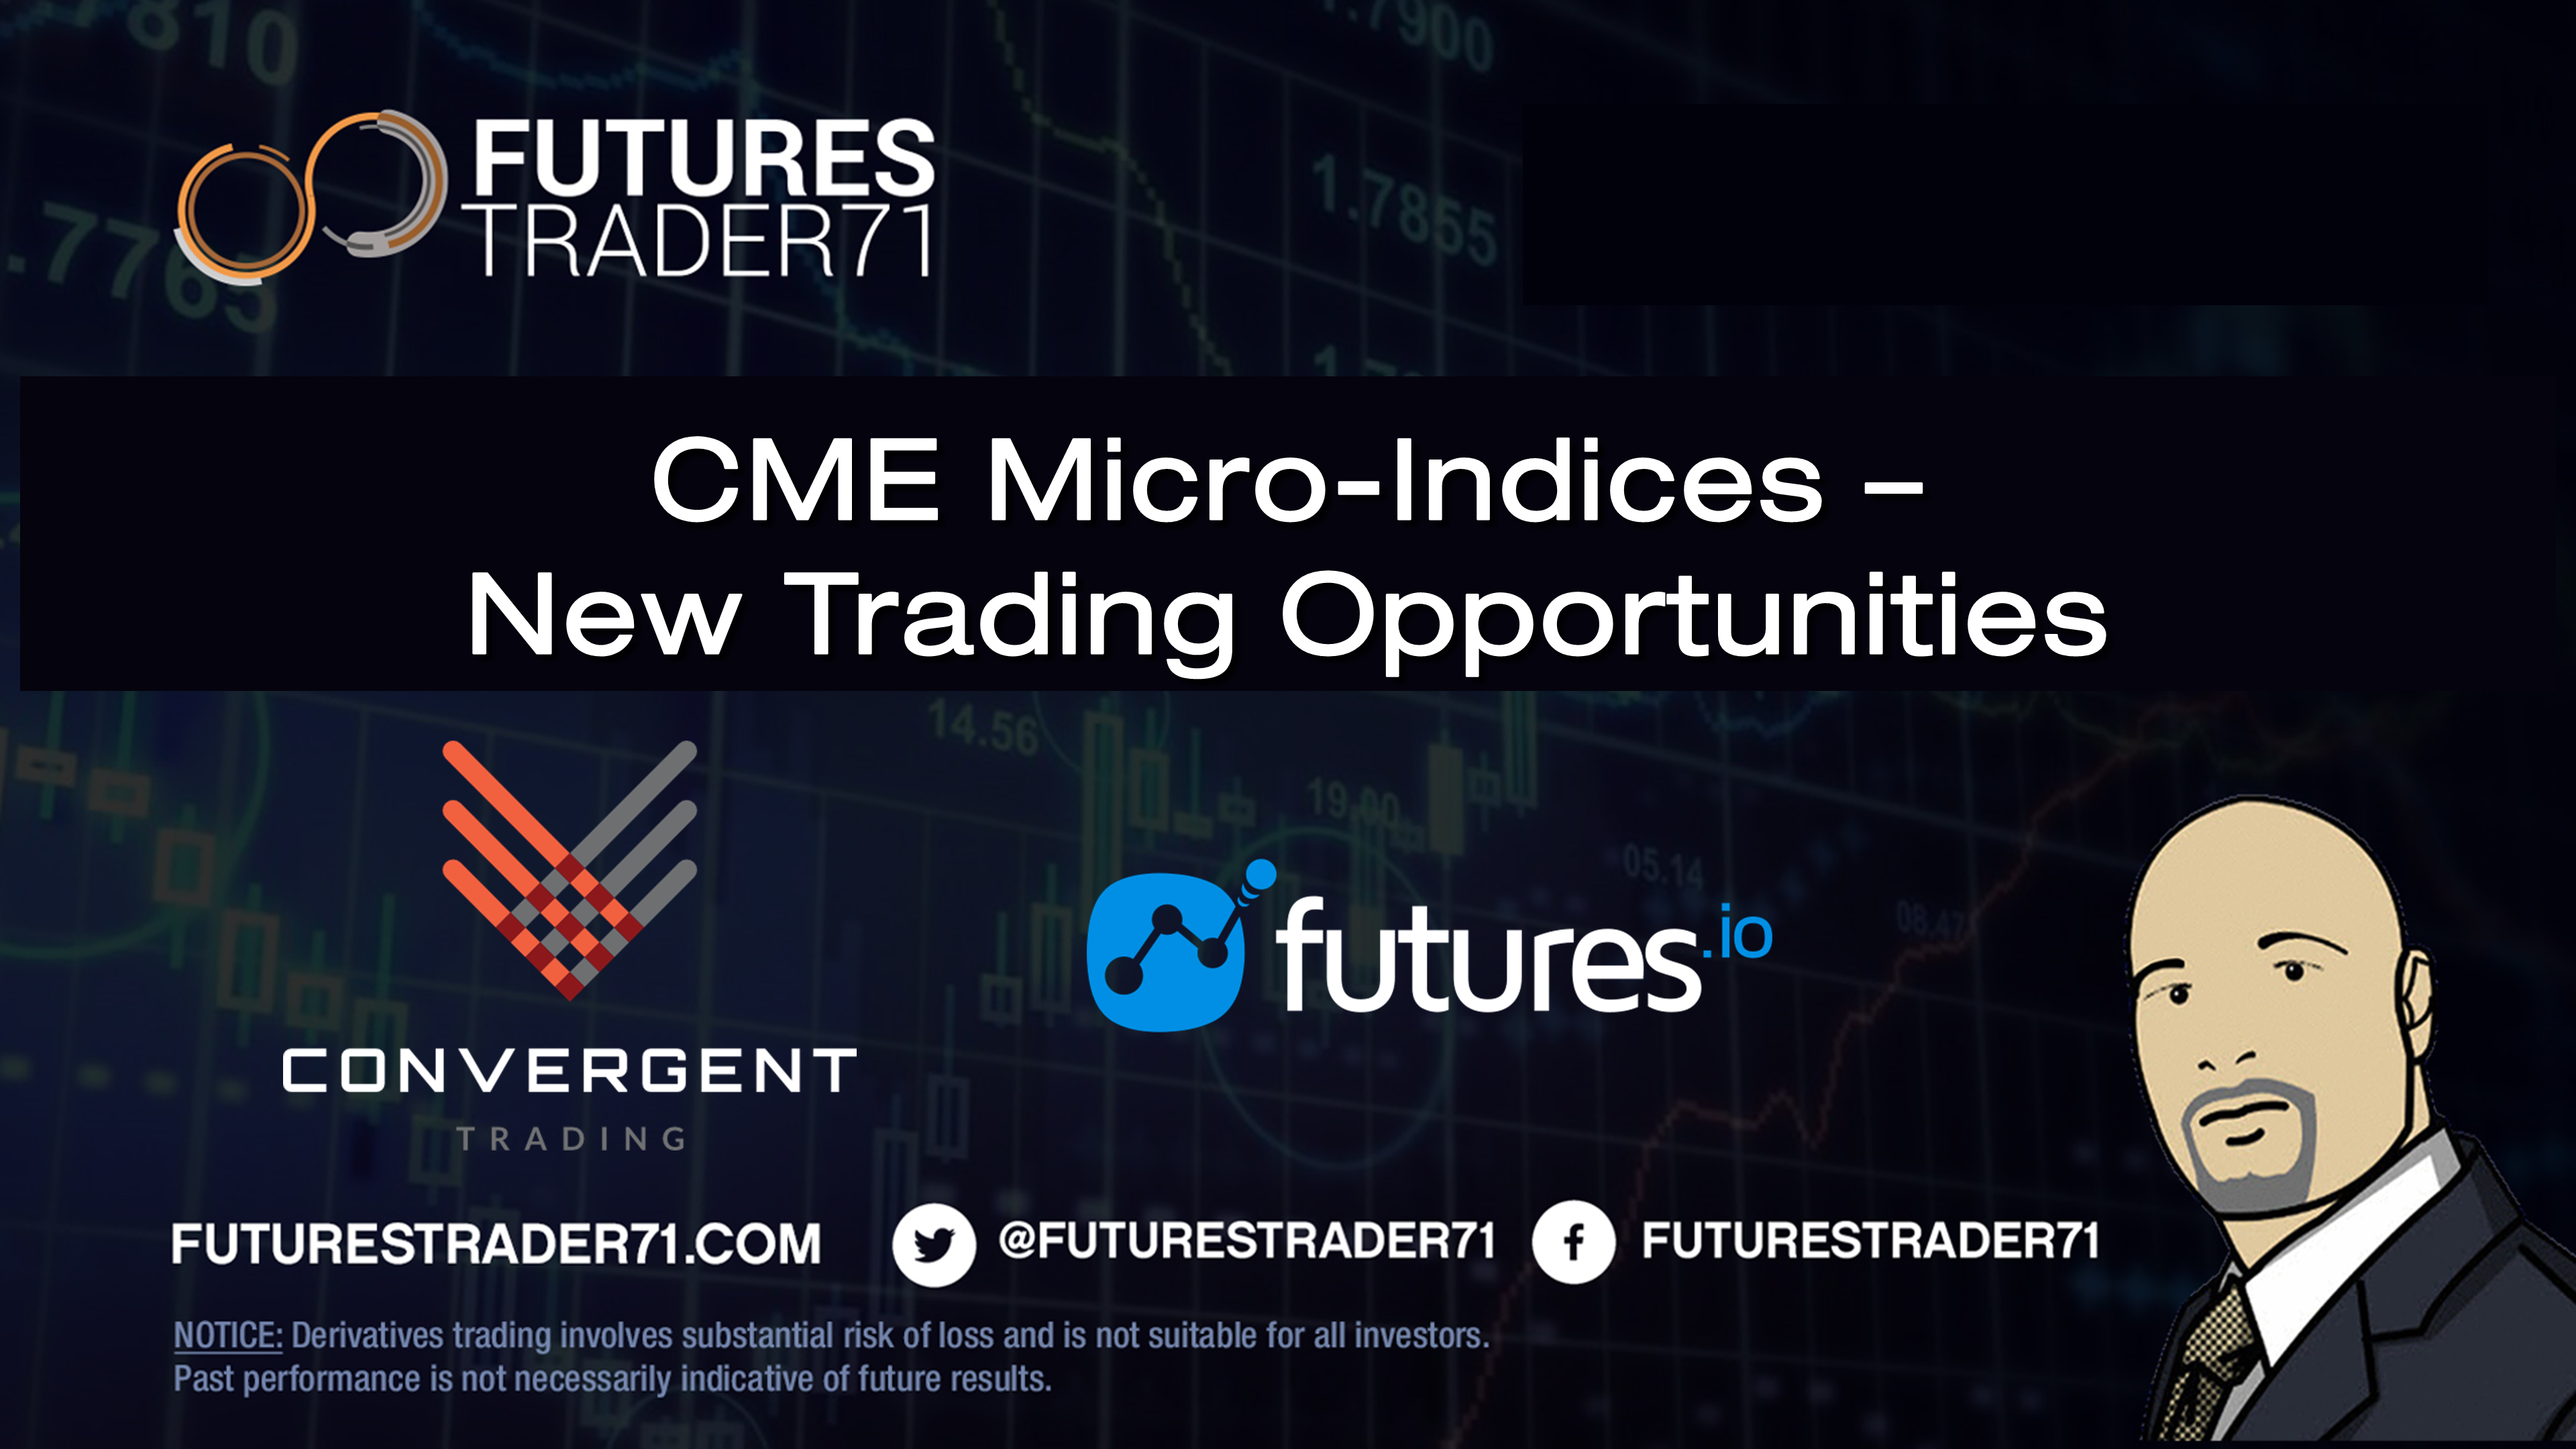 04-25-2019 - CME Micro-Indices – New Trading Opportunities ...